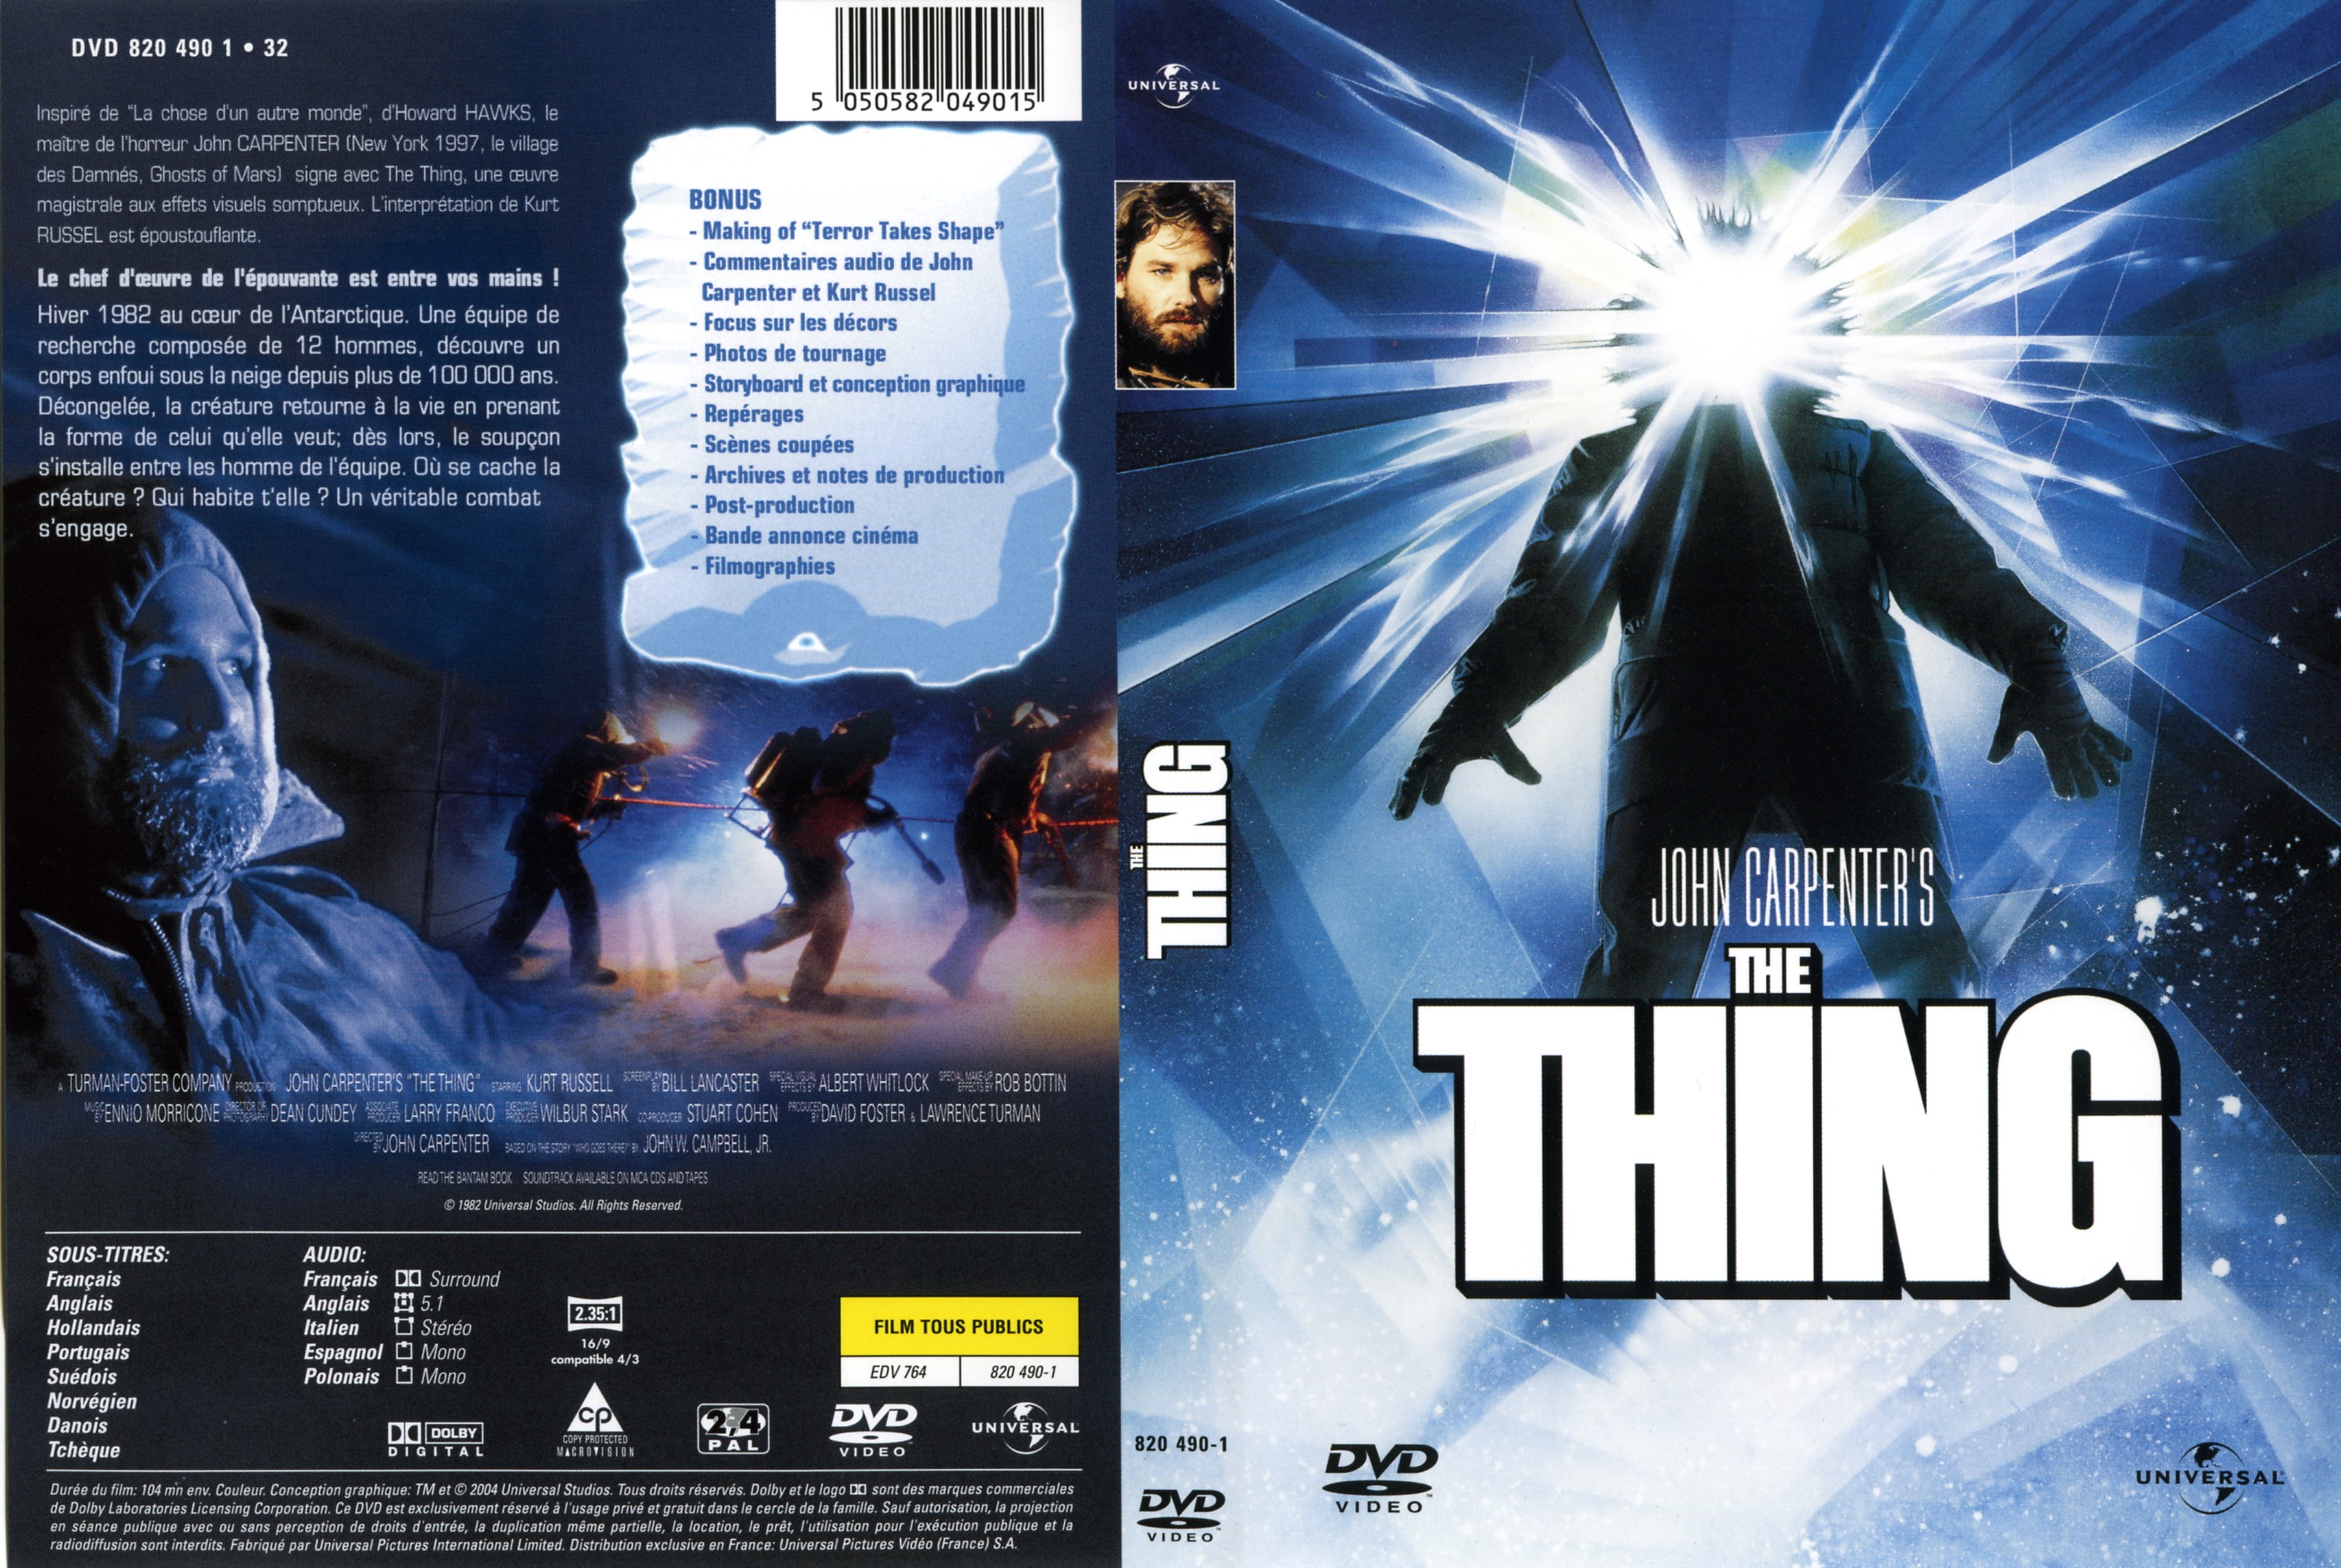 Jaquette DVD The thing v3